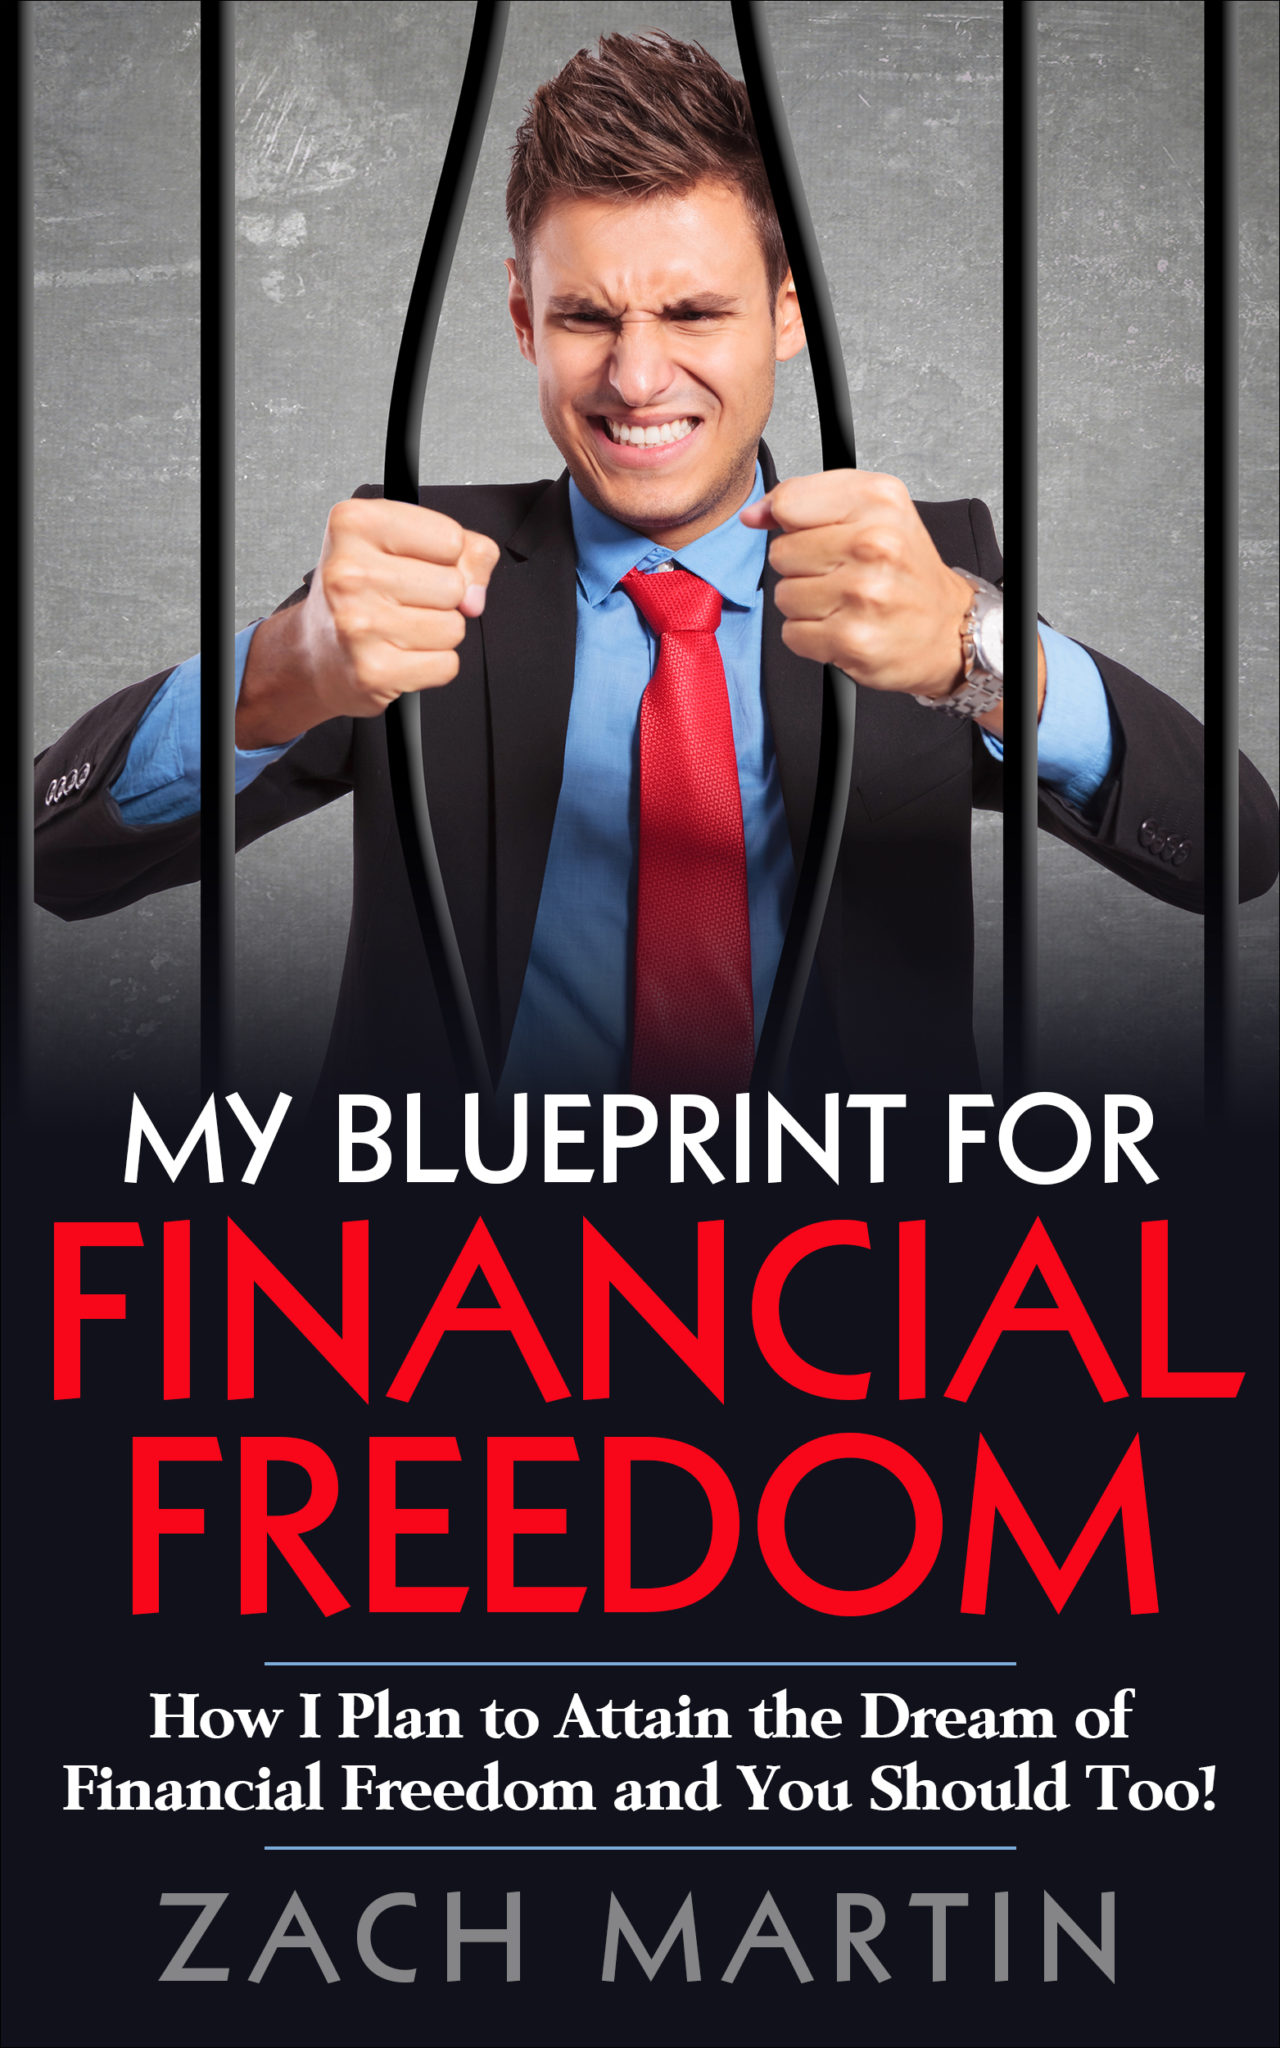 FREE: My Blueprint for Financial Freedom: How I Plan to Attain the Dream of Financial Freedom and You Should Too! by Zach Martin